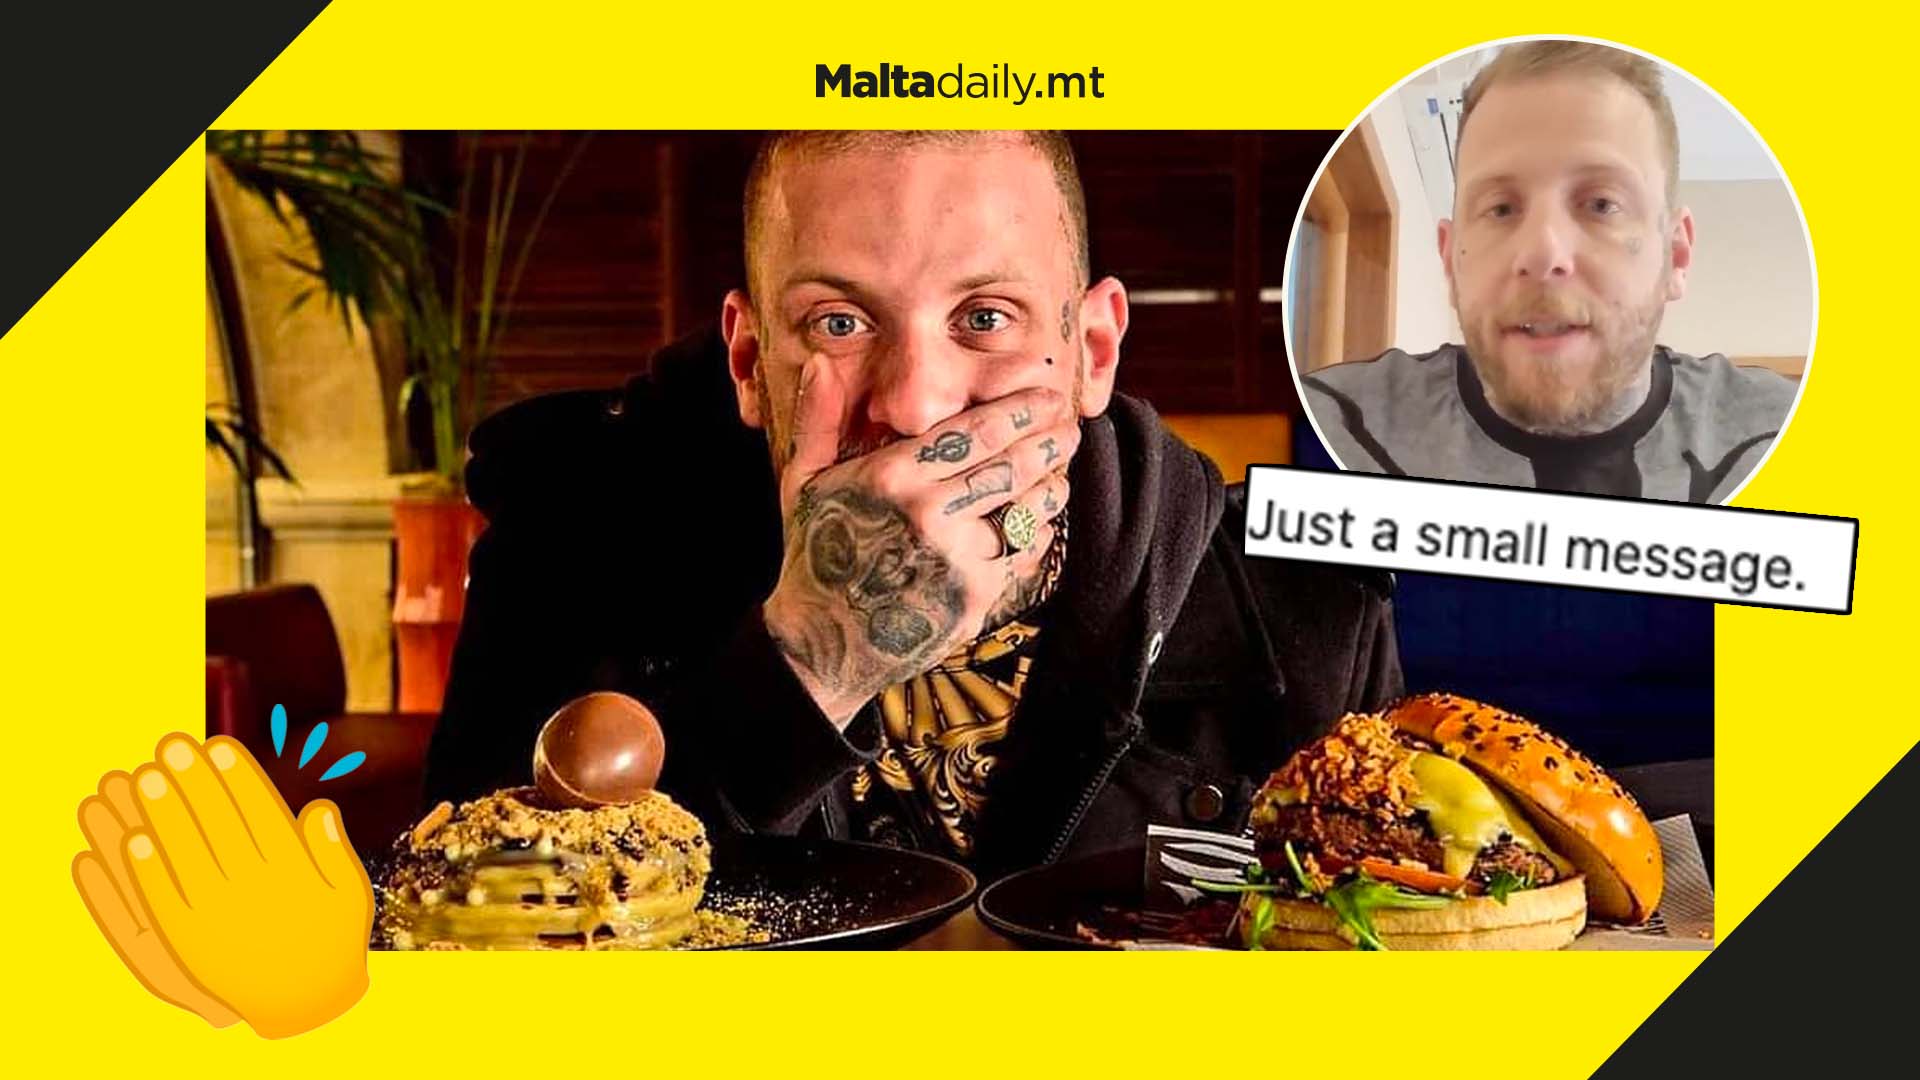 Maltese chef issues plea to put an end to body shaming